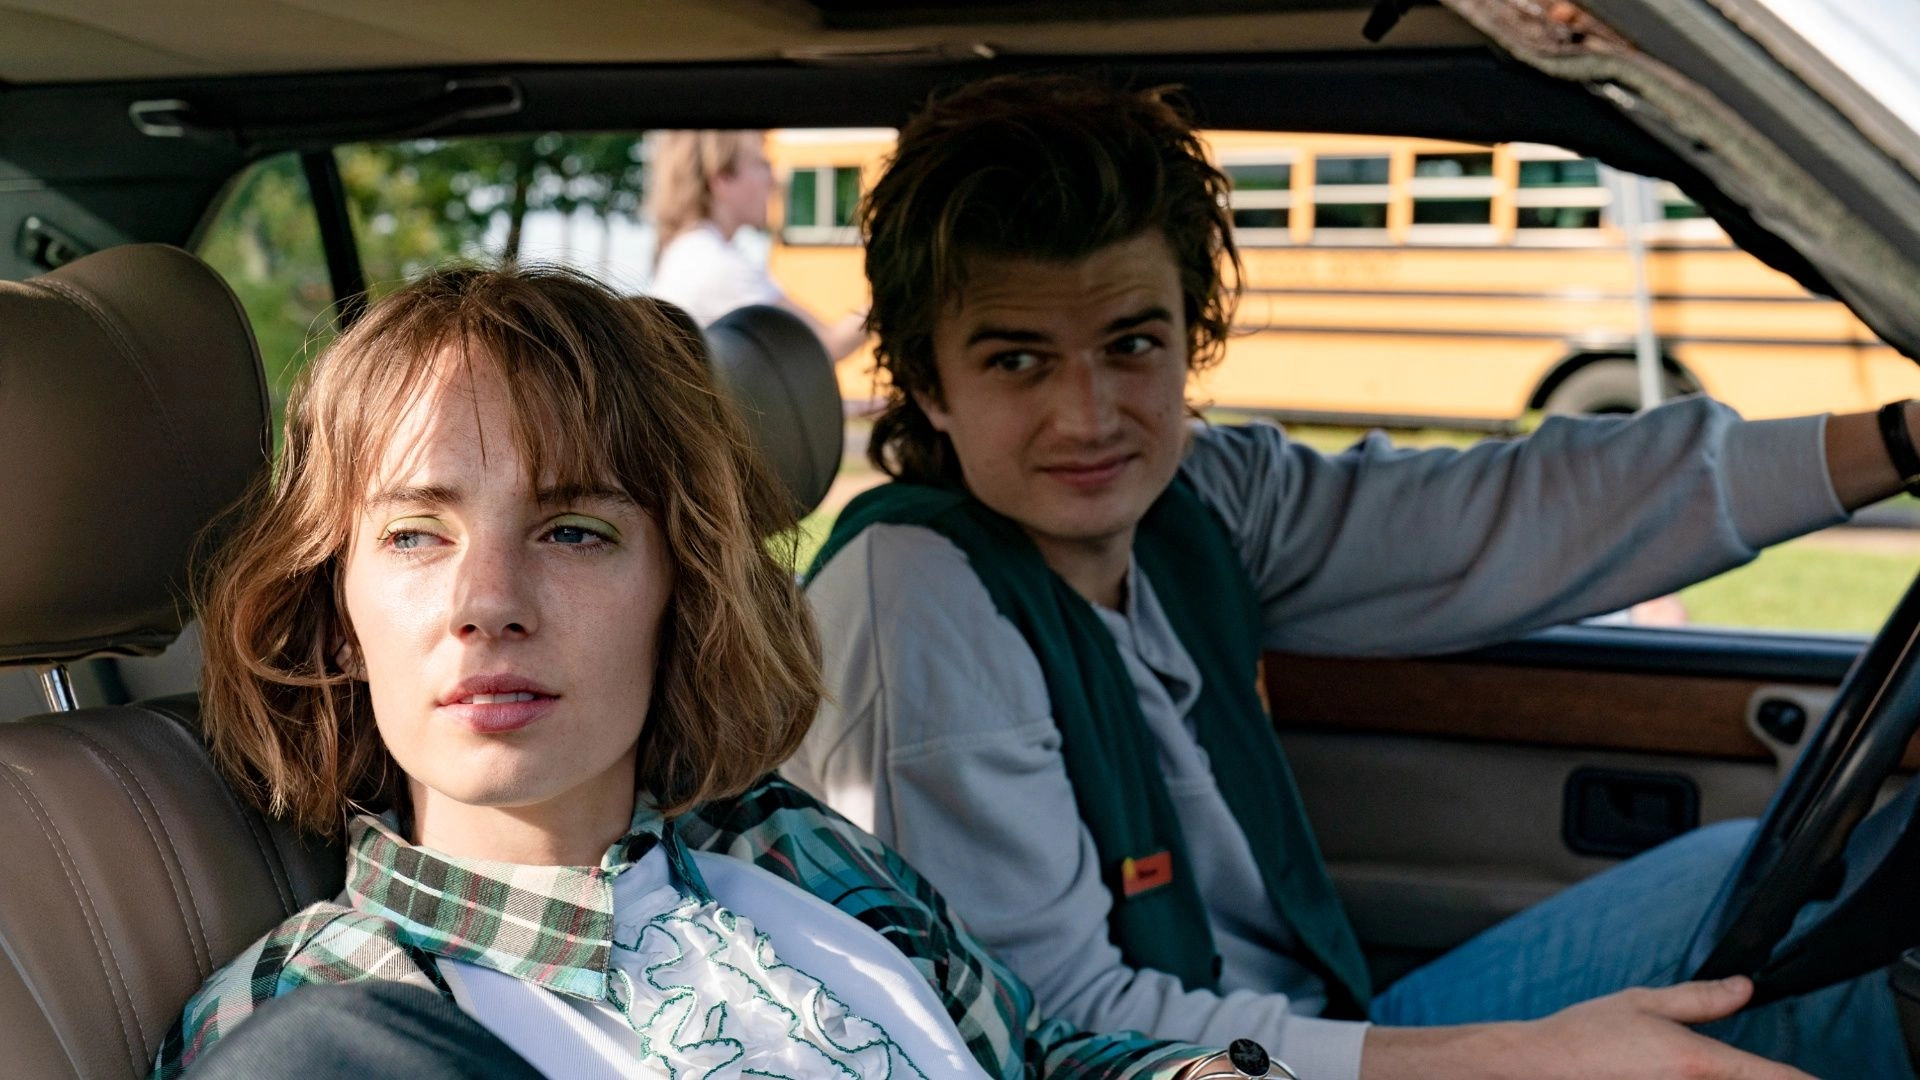 Stranger Things 5 Starts Filming Soon, Says Producer